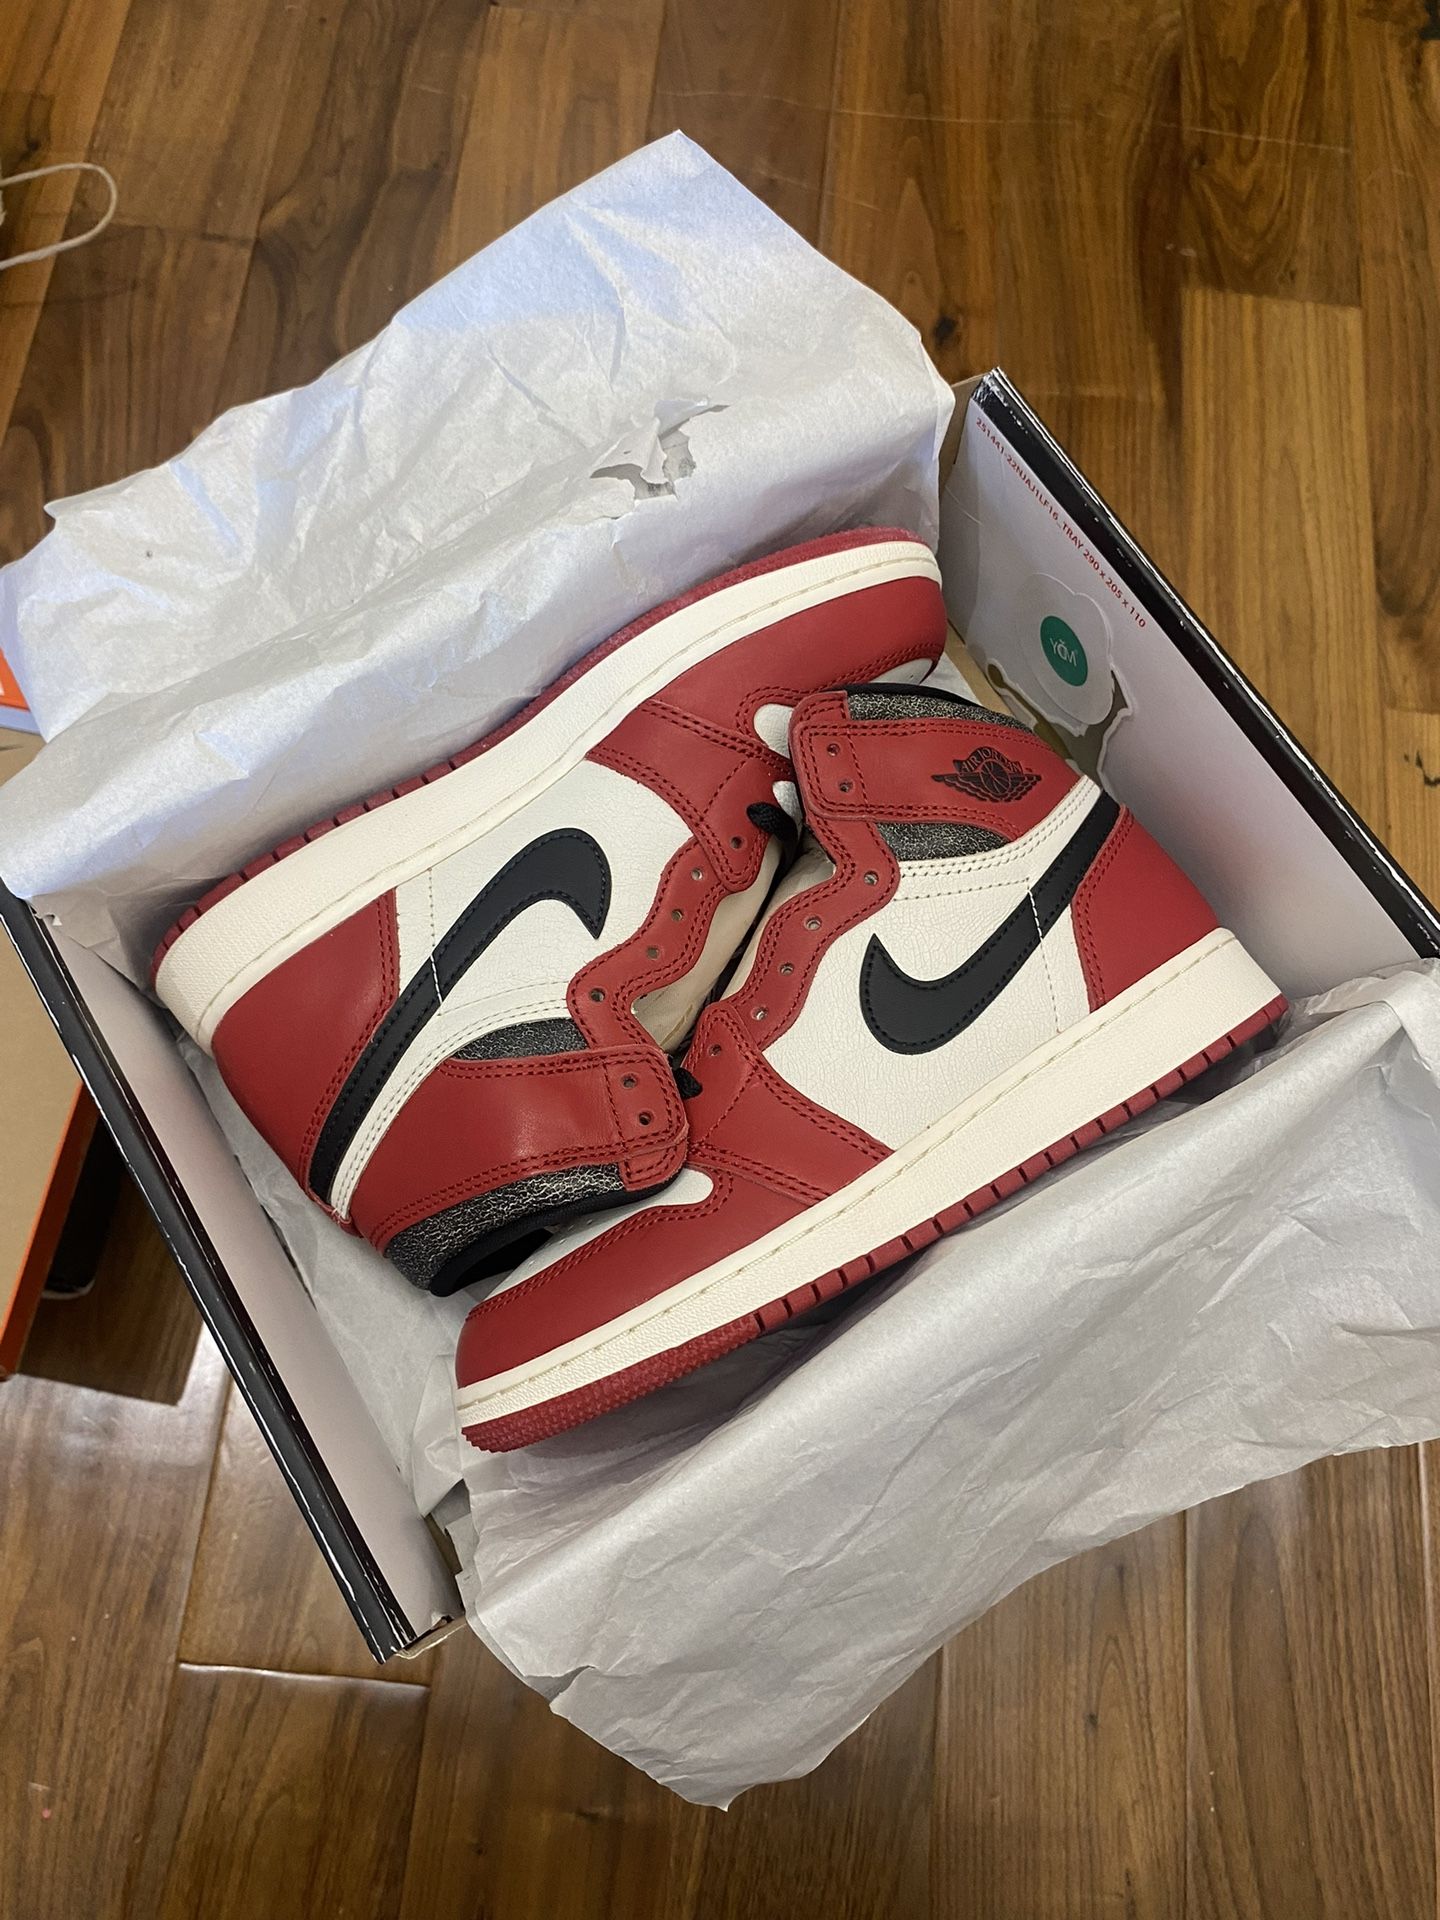 Nike Air Jordan 1 Retro High OG Lost and Found Chicago 